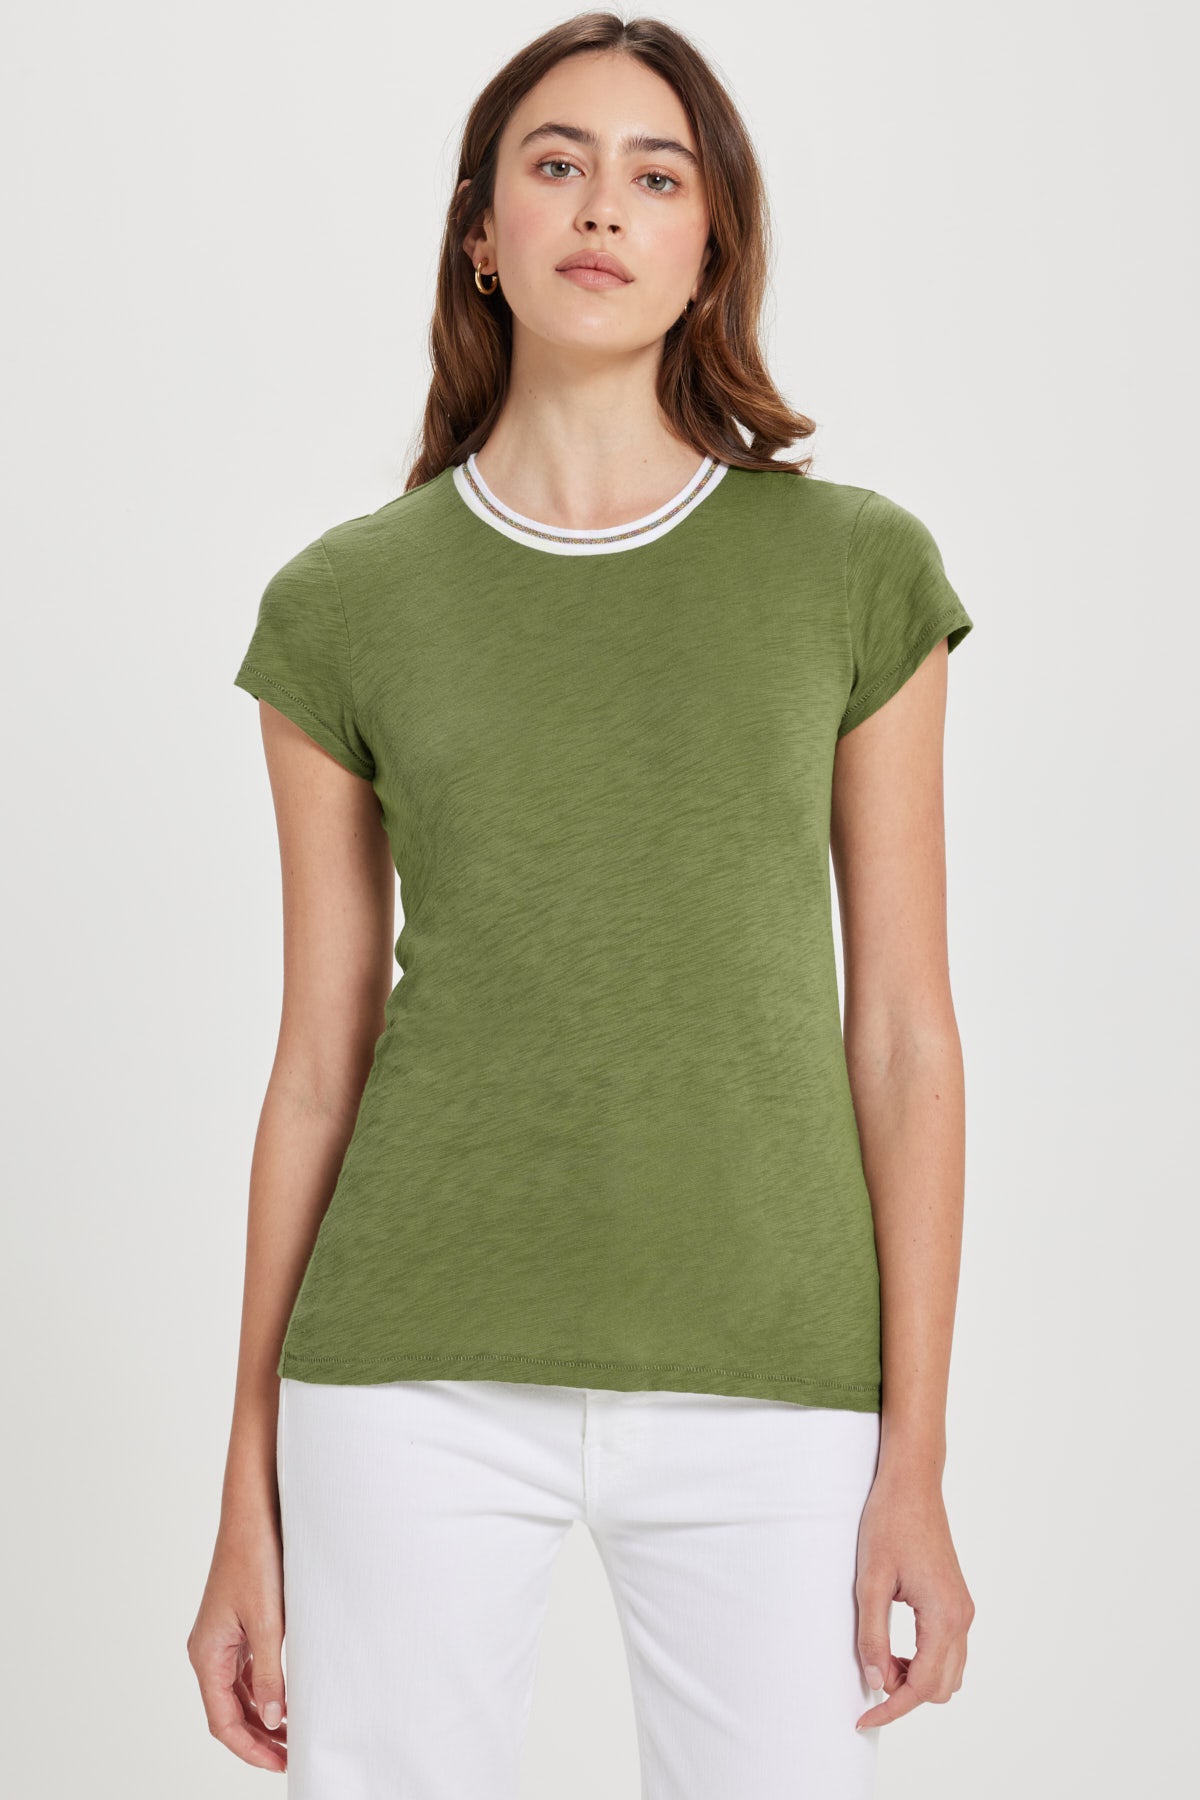 Vibrant Shimmer Tipped Ringer Tee - Goldie LeWinter